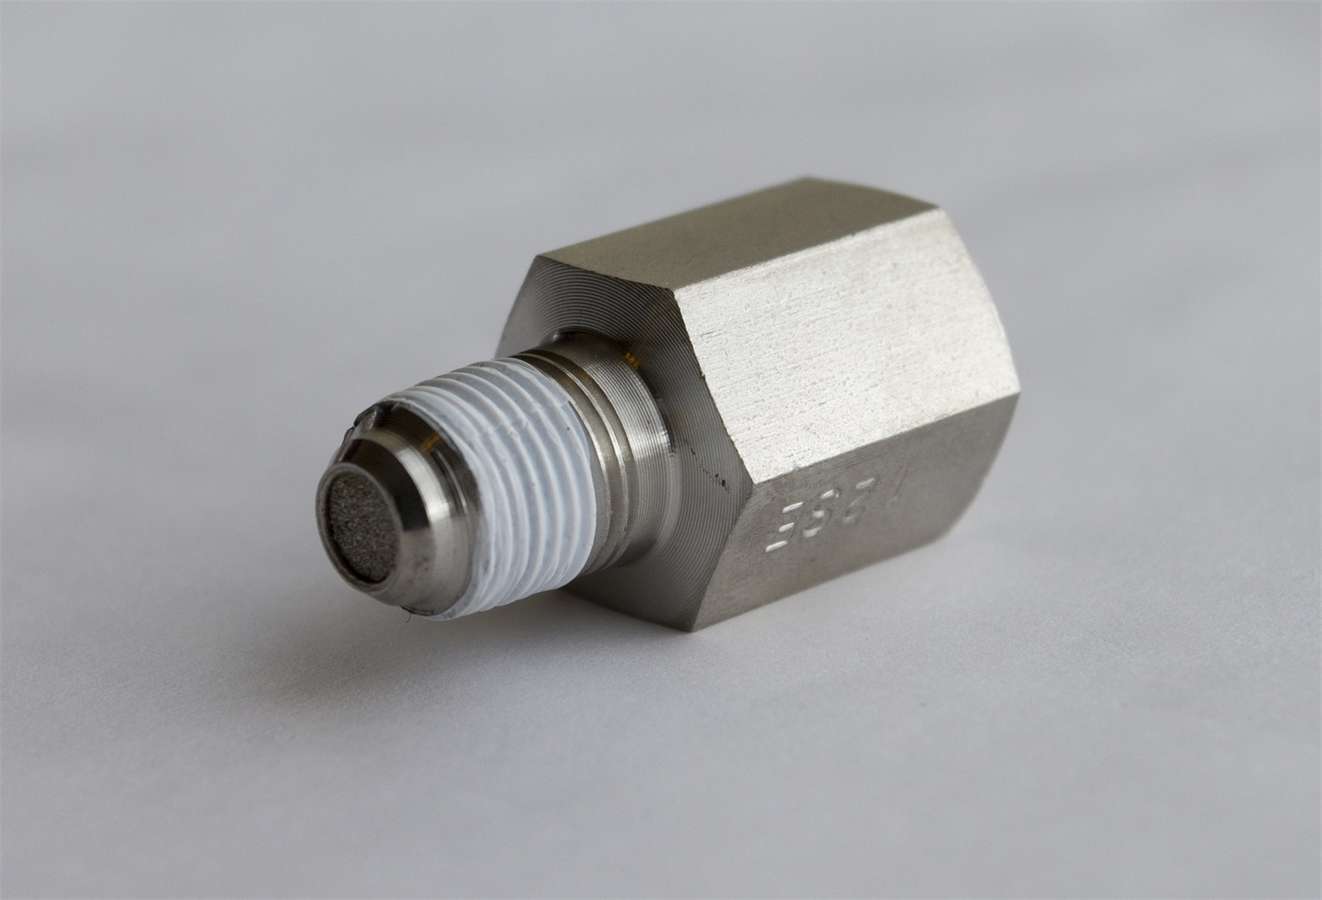 Auto Meter Fitting, Restrictor, Straight, 1/8" NPT Male to 1/8" NPT Female, Brass, Natural, Mechanical Fuel/Nitrous Pressure Gau